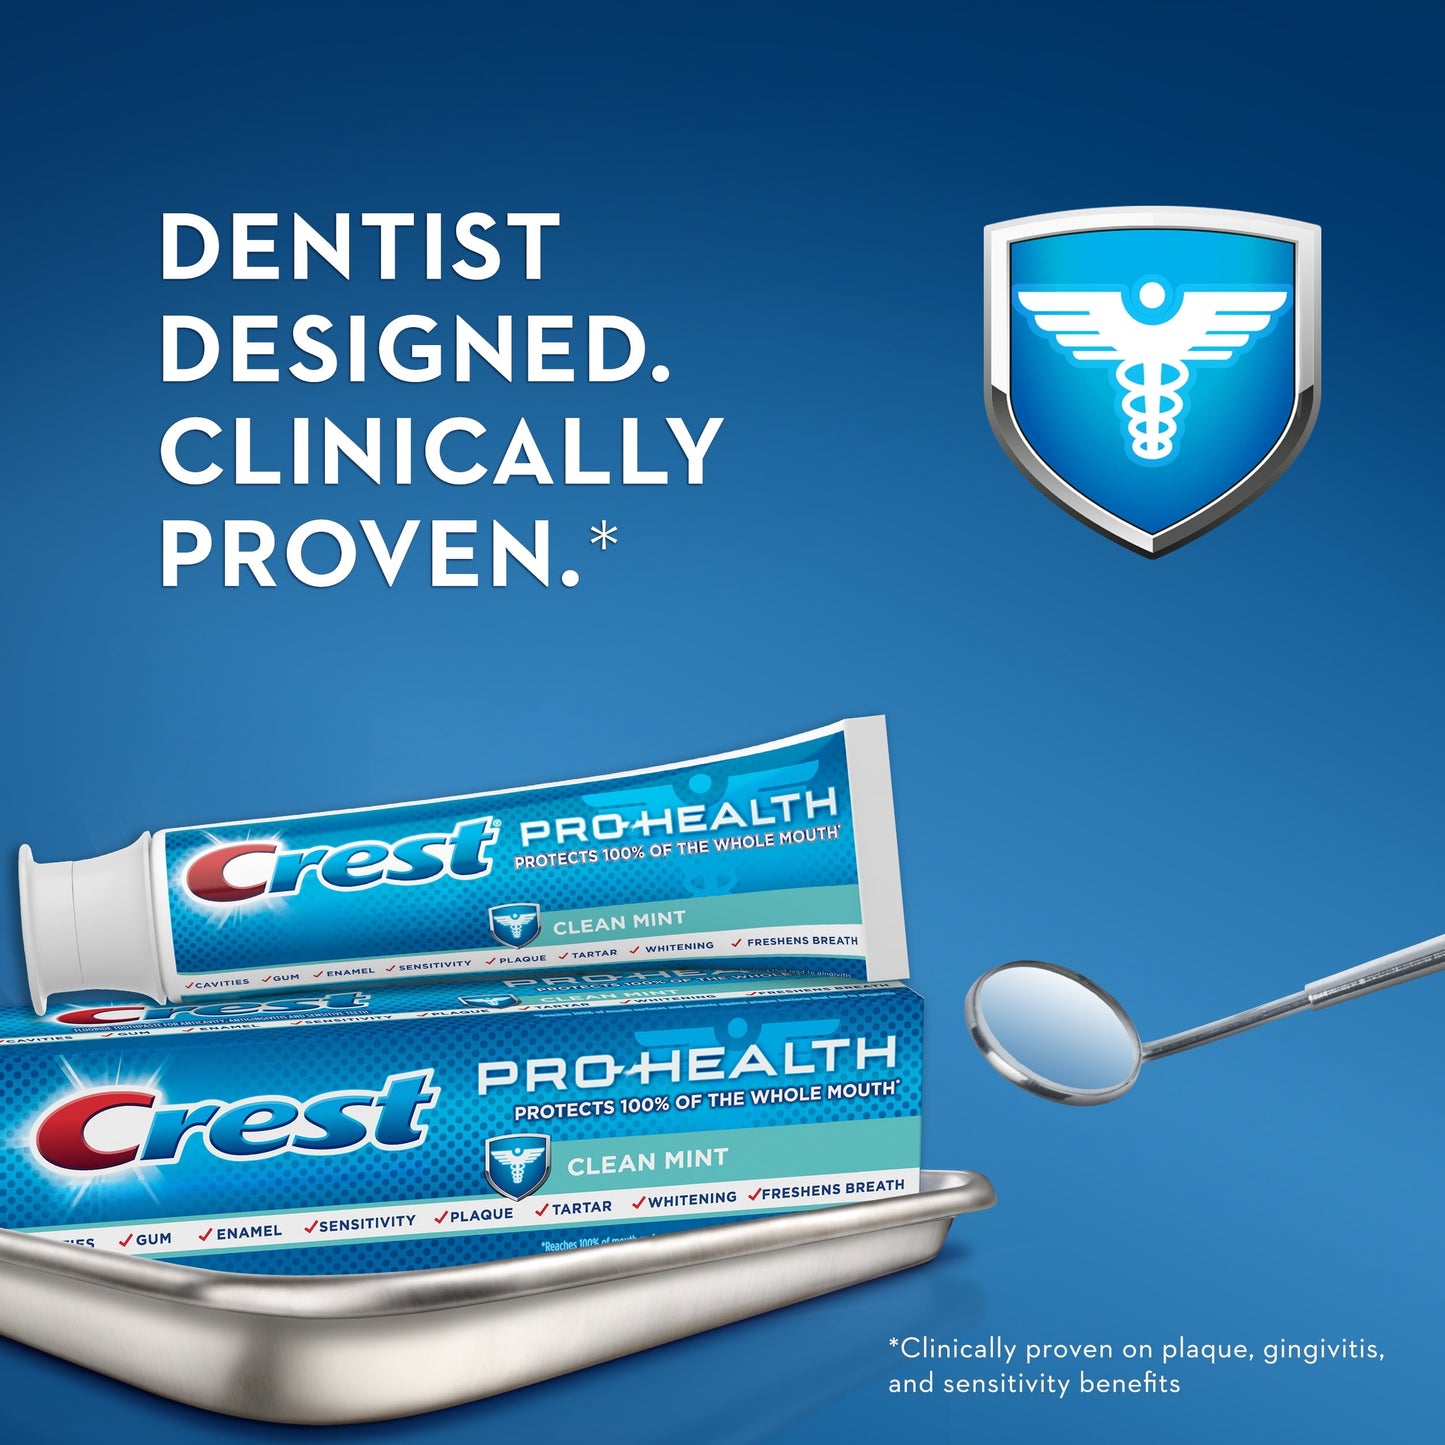 Crest Pro-Health Clean Mint Toothpaste, 4.6oz, Twin Pack